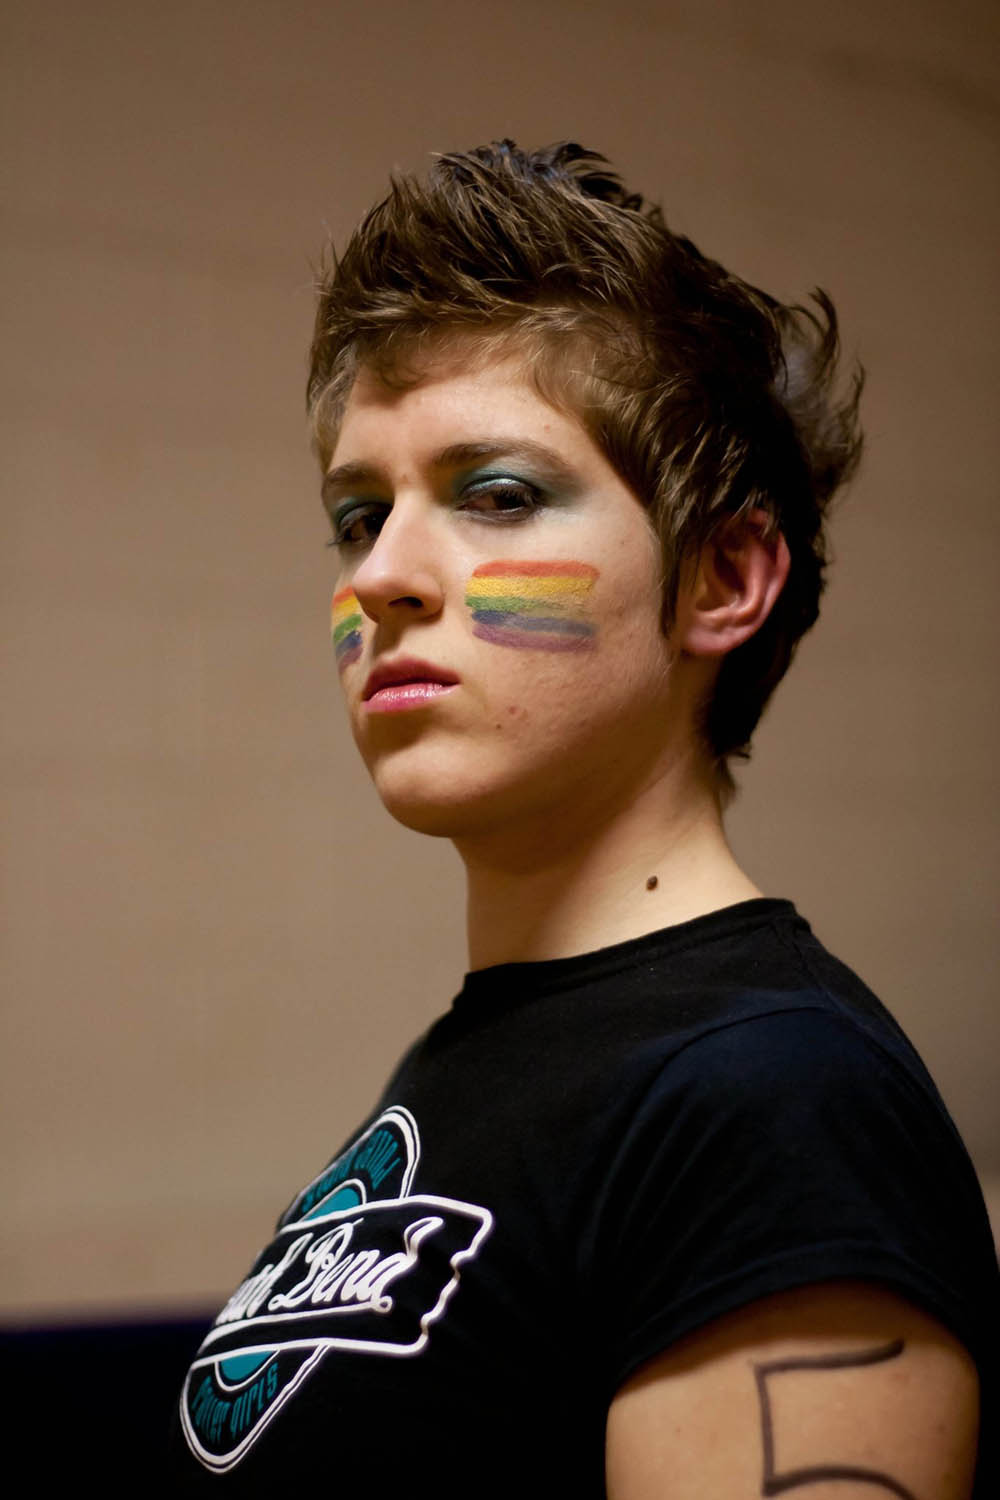 Portrait of Charlotte Barnett. Barnett's face is painted with two rainbow pride flags